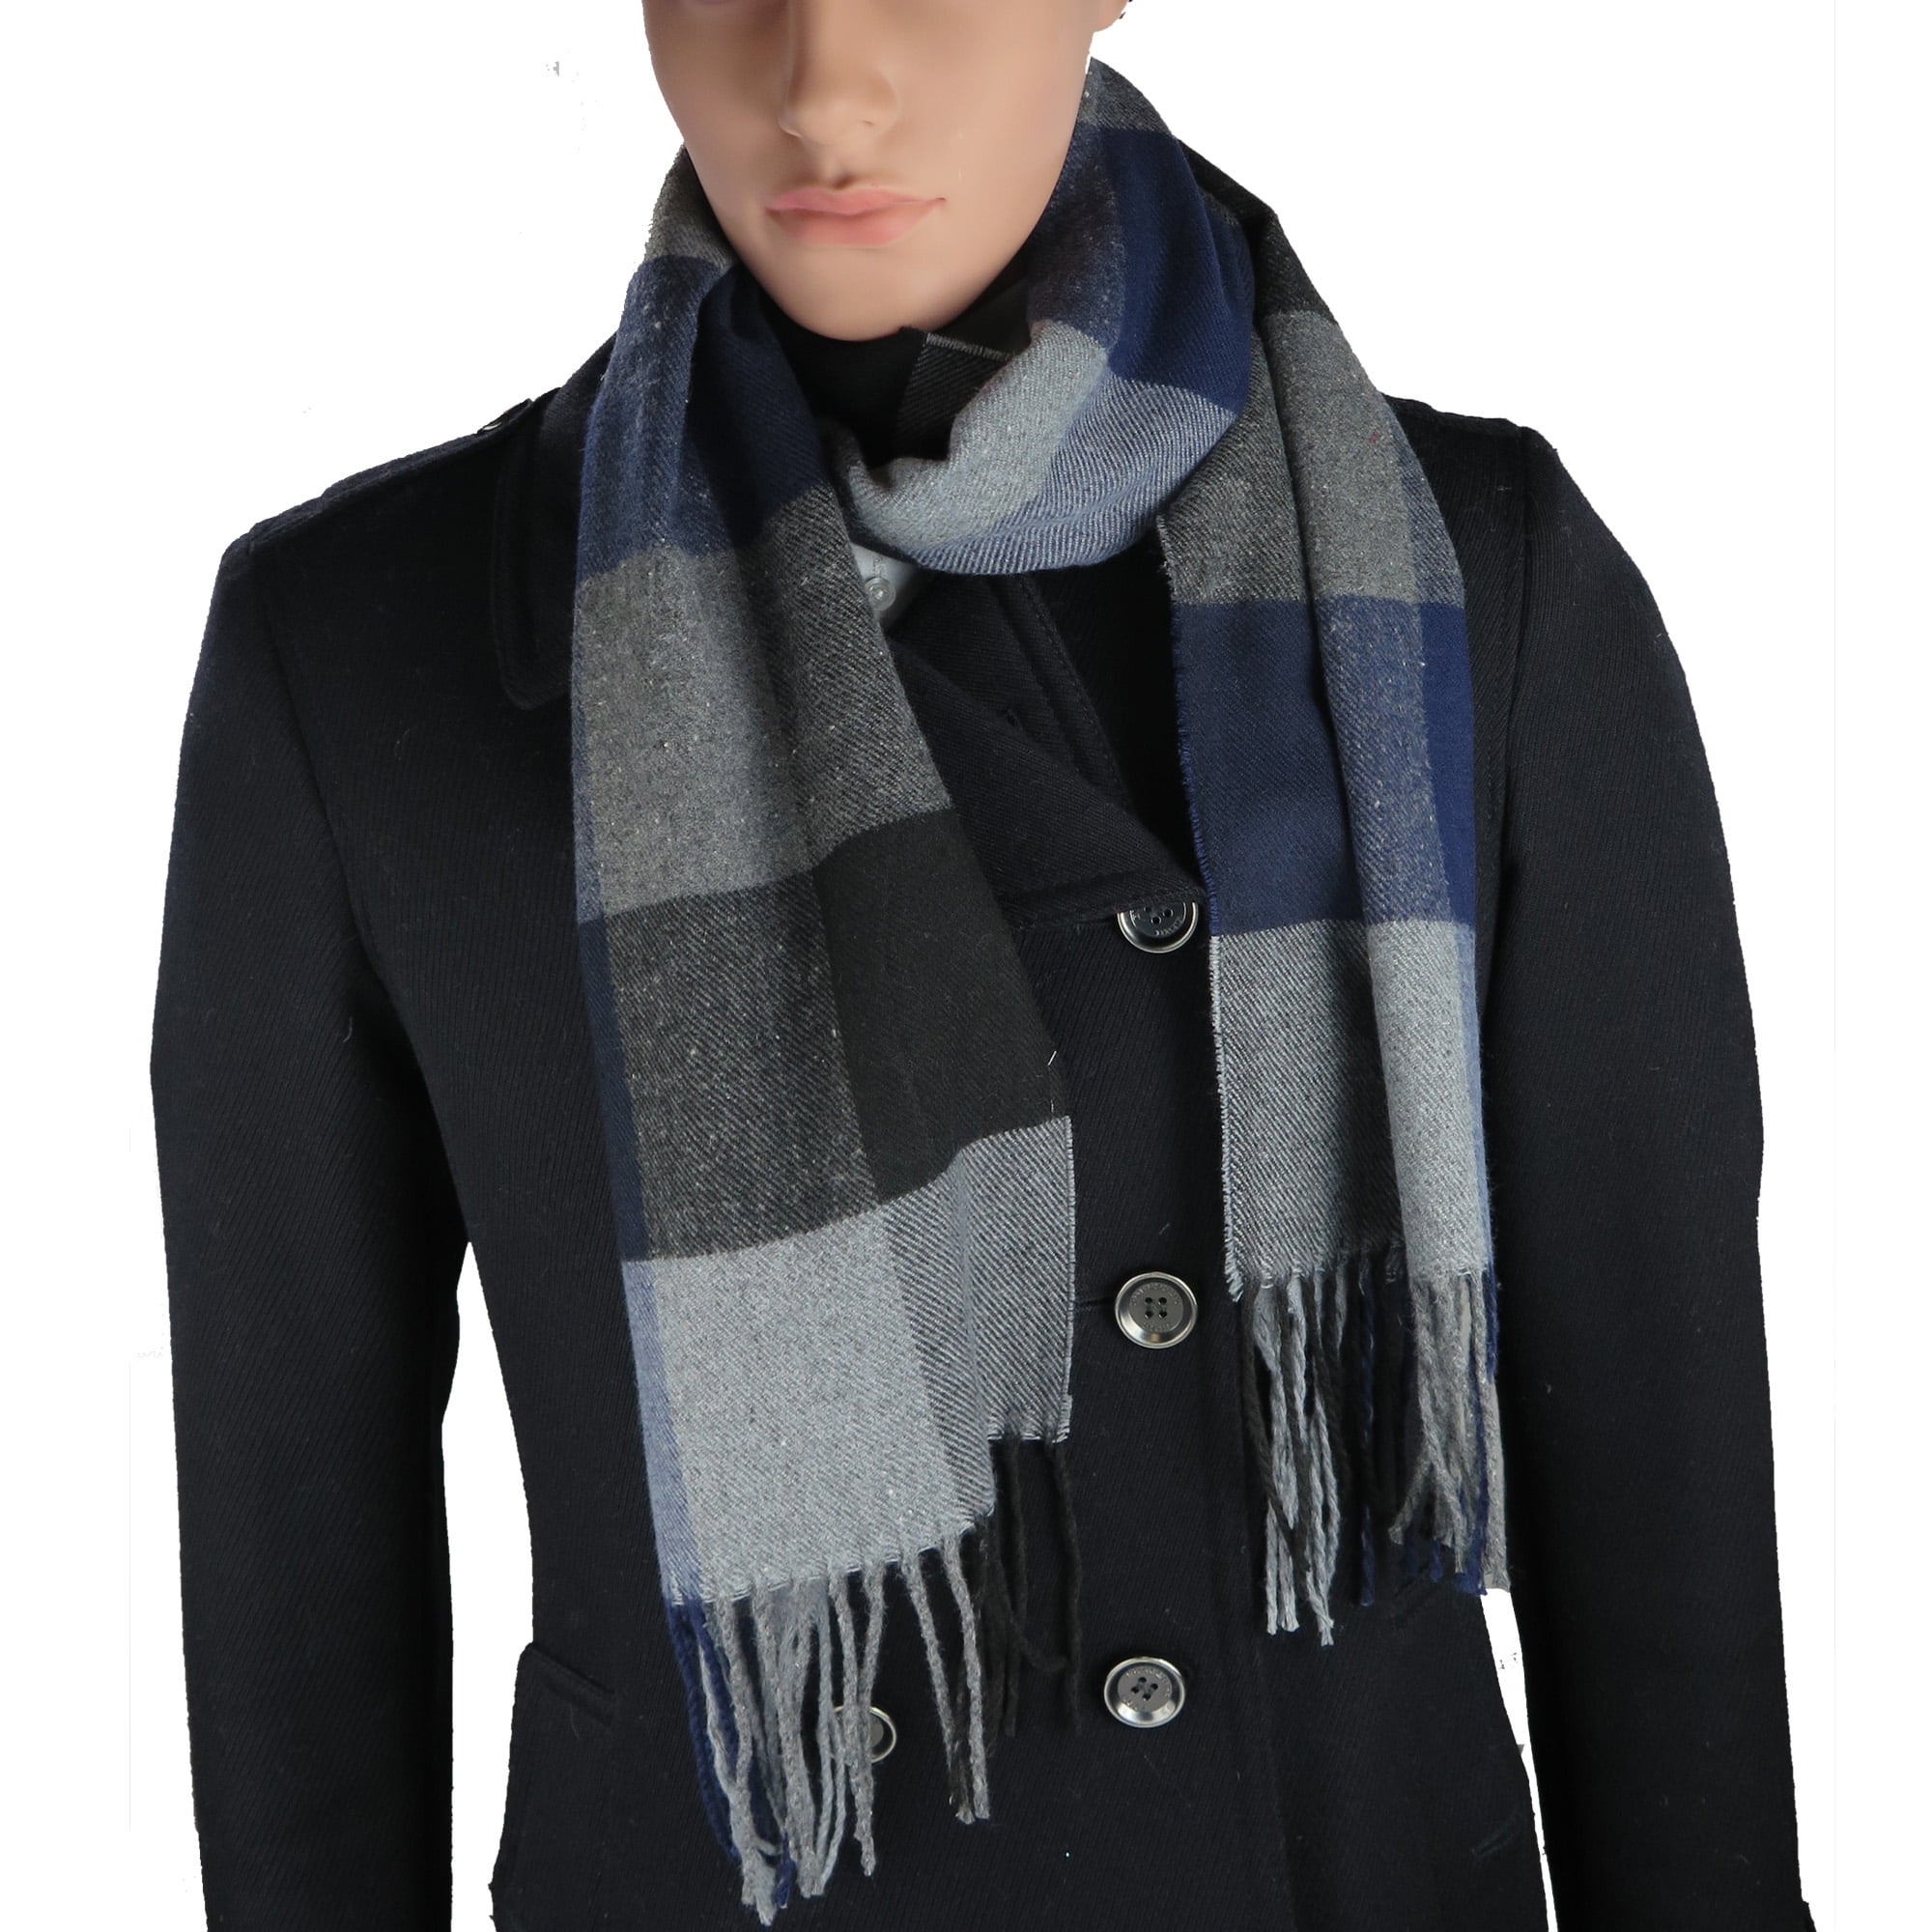 Cashmere-Feel Acrylic Winter Scarf For Men And Women In 8 Plaid Prints ...